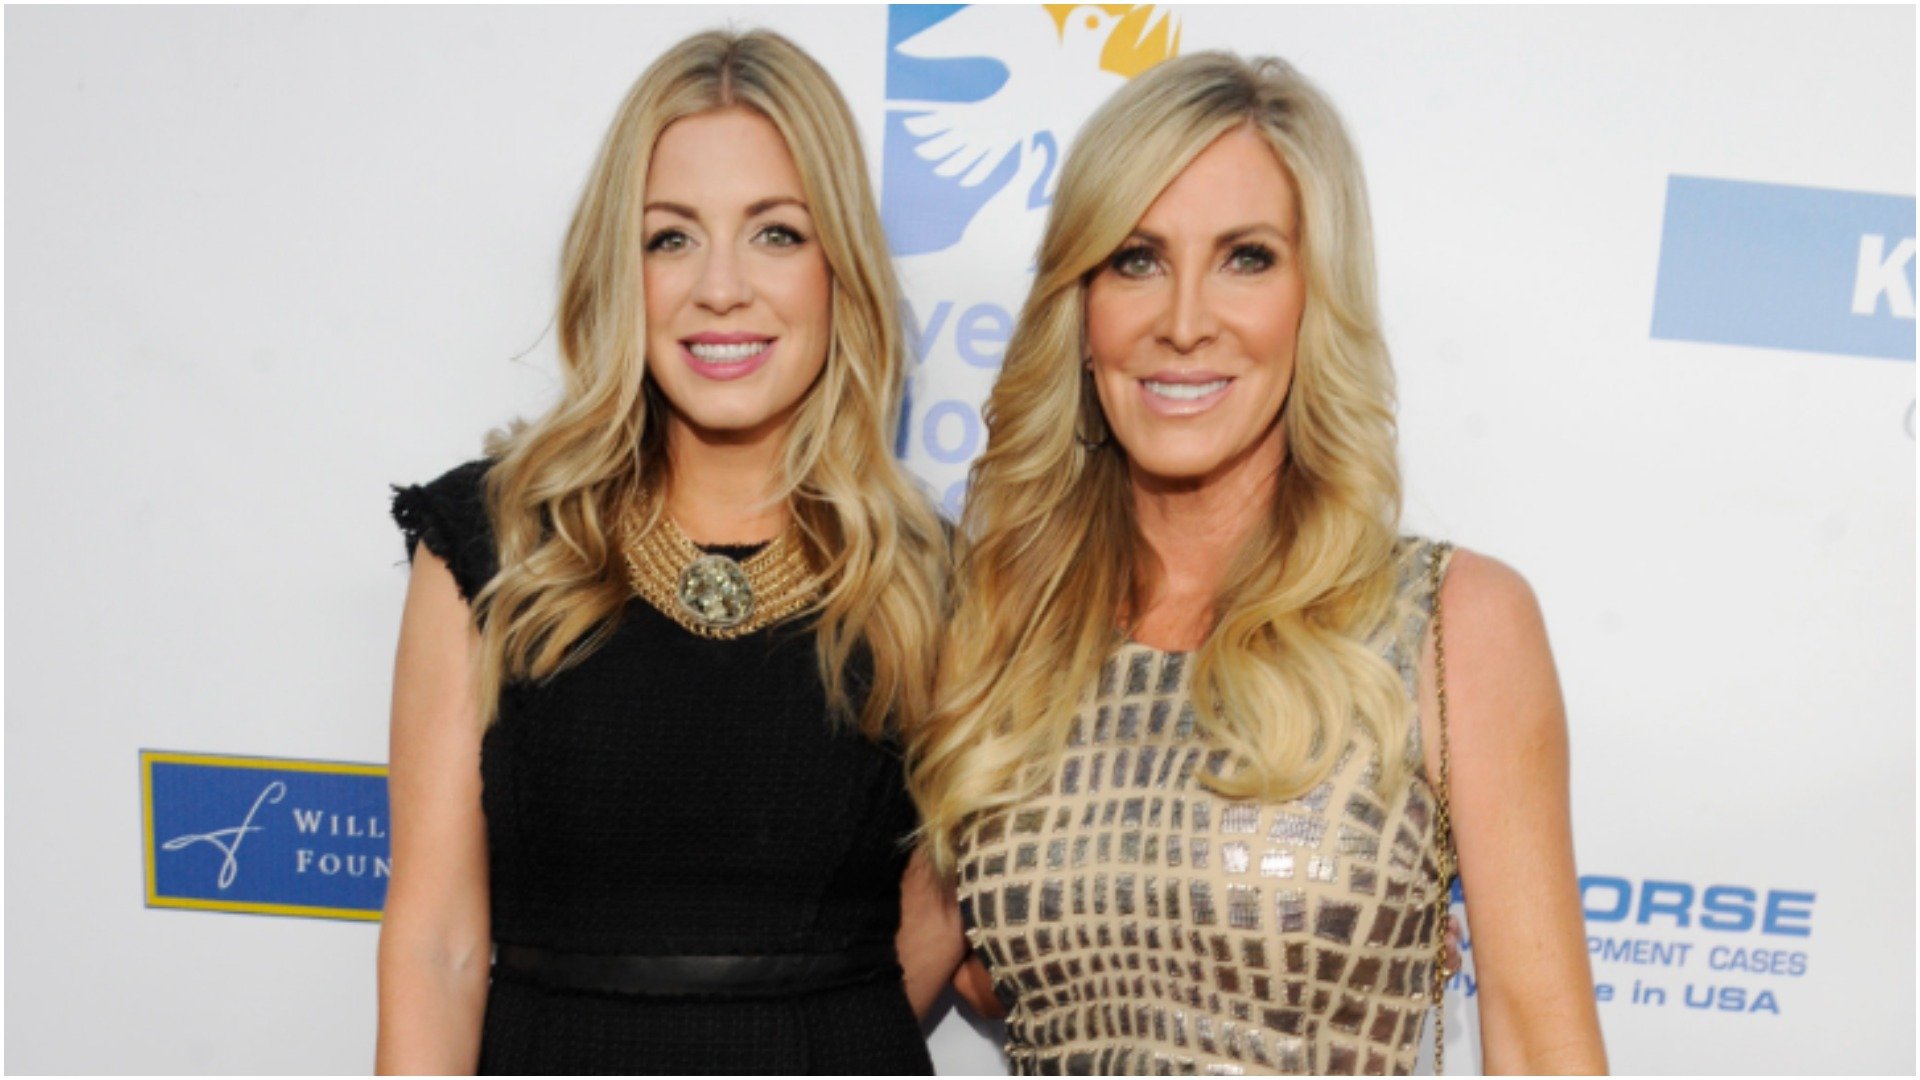 'RHOC''s Ashley Zarlin and Lauri Peterson smile for a photo at an event in 2013